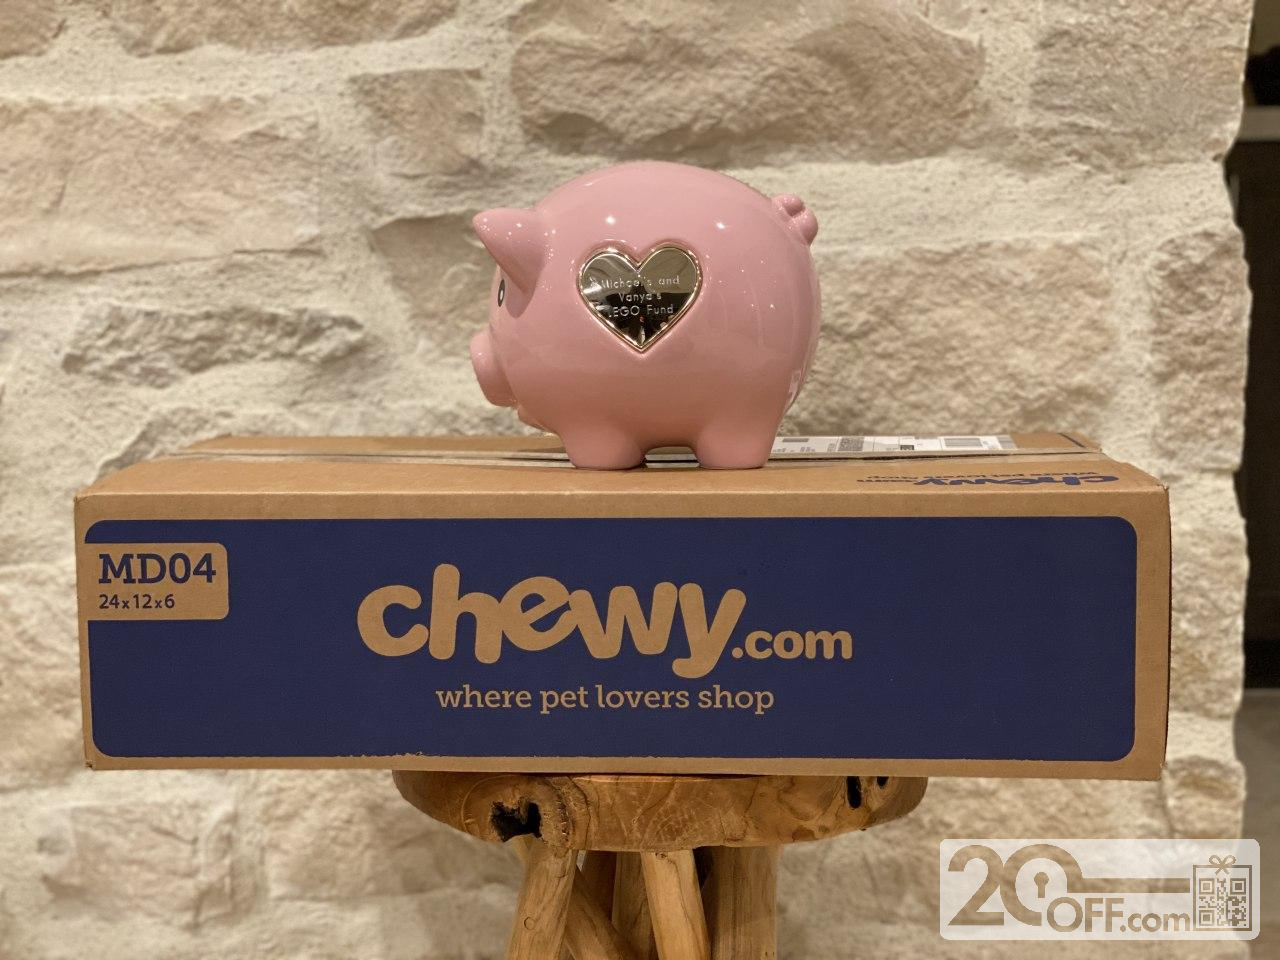 Chewy Pet Lovers Shop